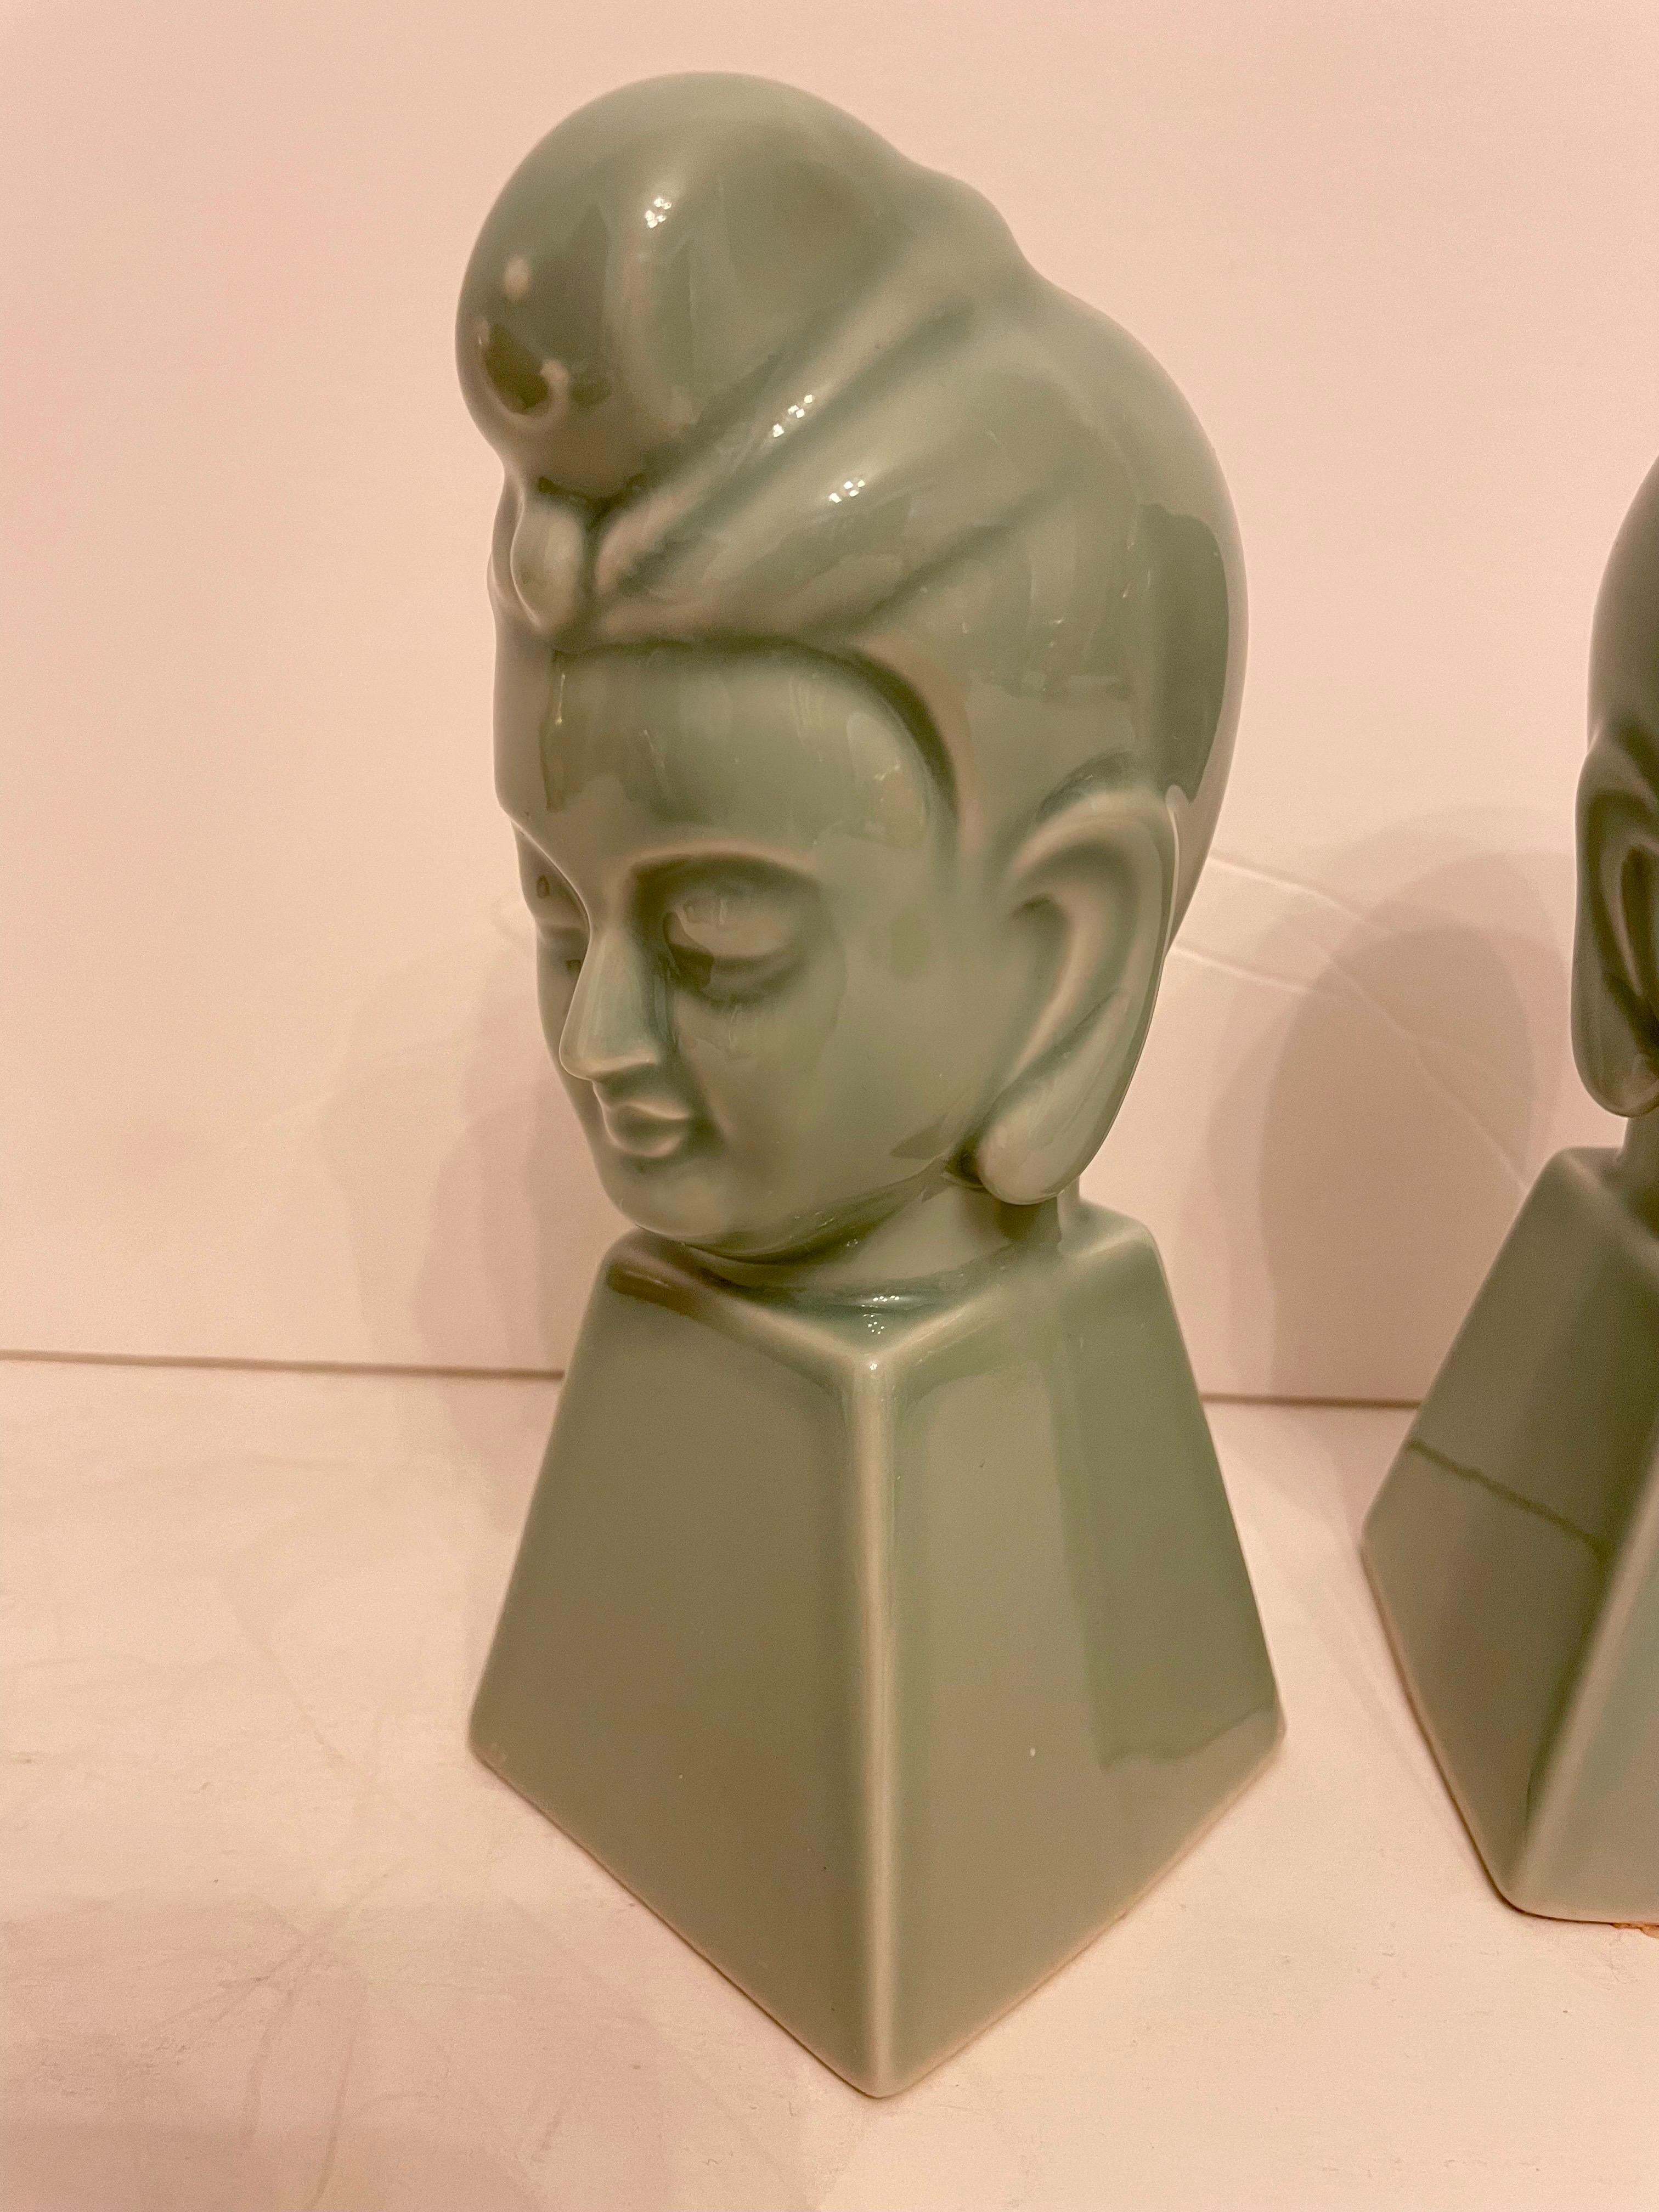 Pair of Ceramic Buddha Sculptures or  Bookends. Nicely detailed, in Good condition. Any dark or light spots are reflection only. Sticker on bottom marked Japan. 7